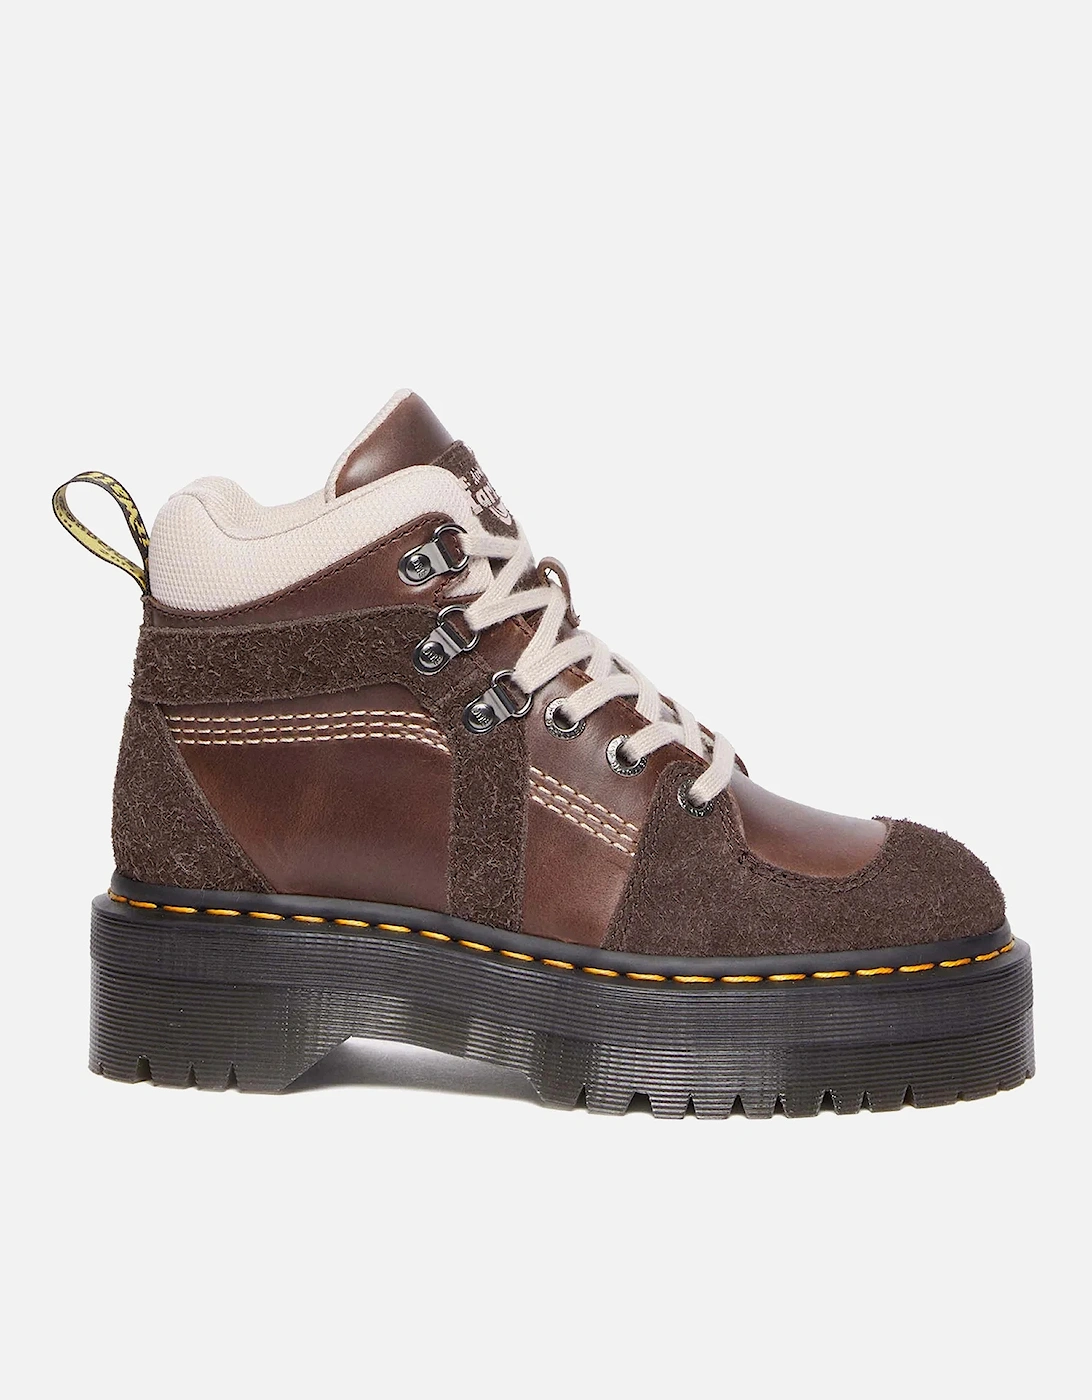 Dr. Martens Zuma Leather Hiking Style Boots - Dr. Martens - Home - Women's Shoes - Women's Boots - Dr. Martens Zuma Leather Hiking Style Boots, 2 of 1